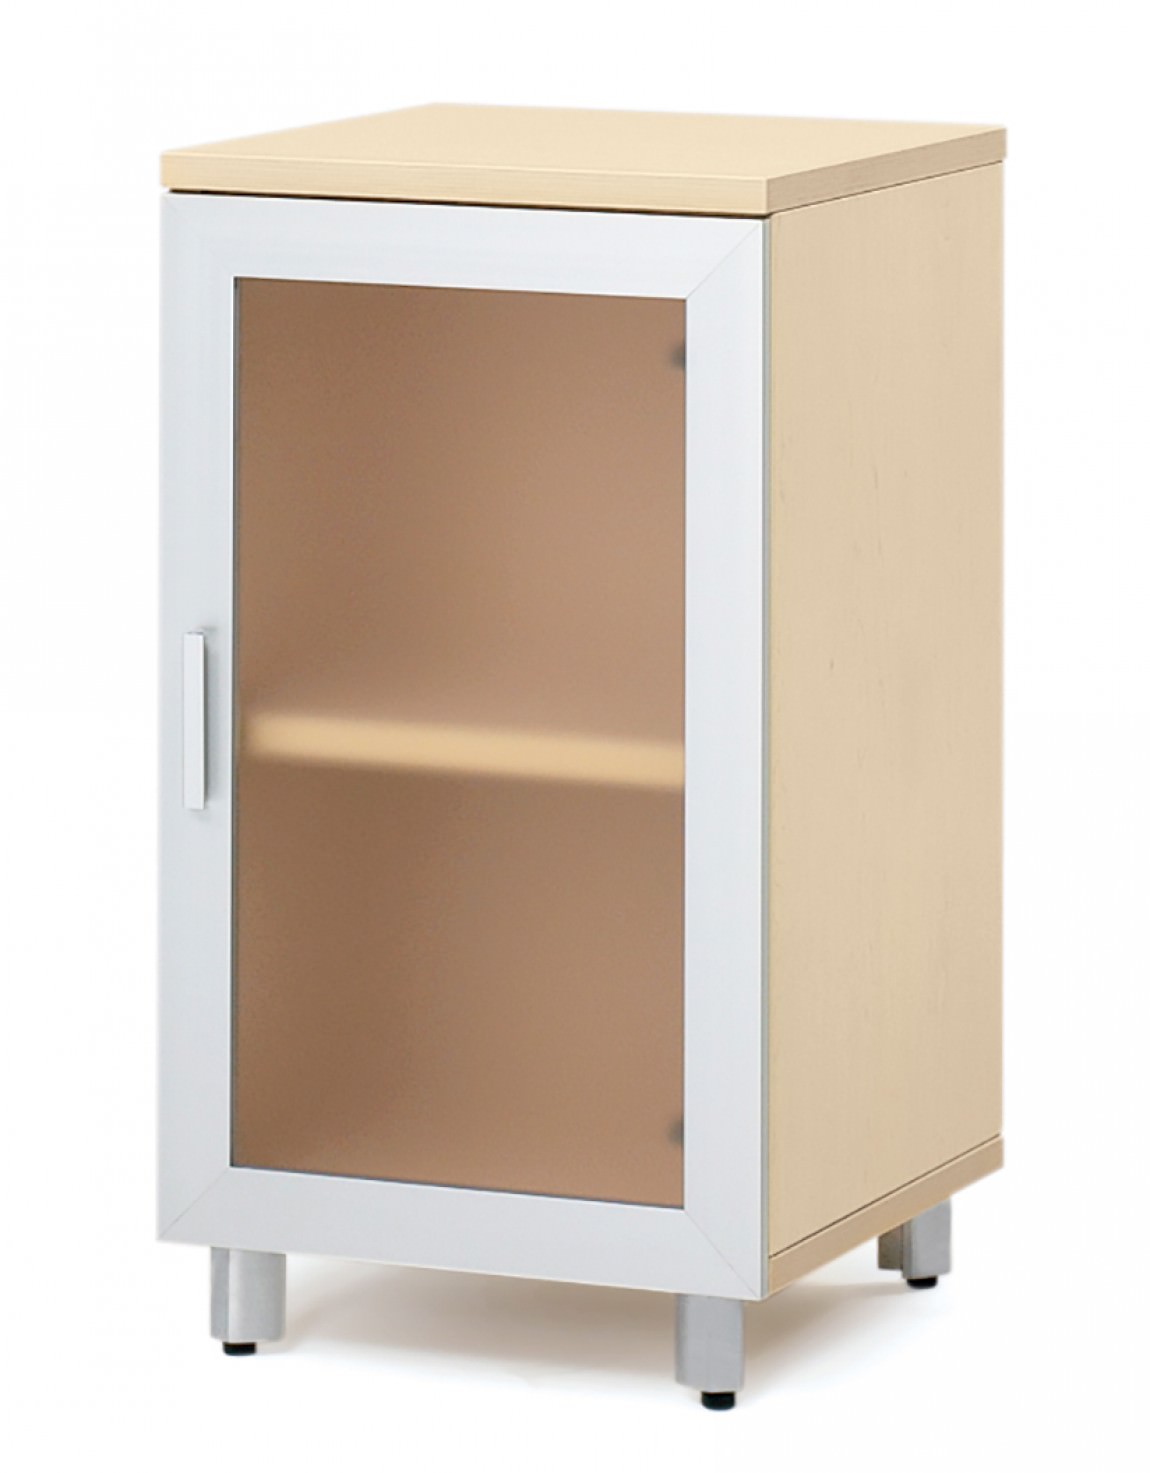 Small Storage Cabinet - Hard Rock Maple, Snow - Concept 300 by Groupe Lacasse